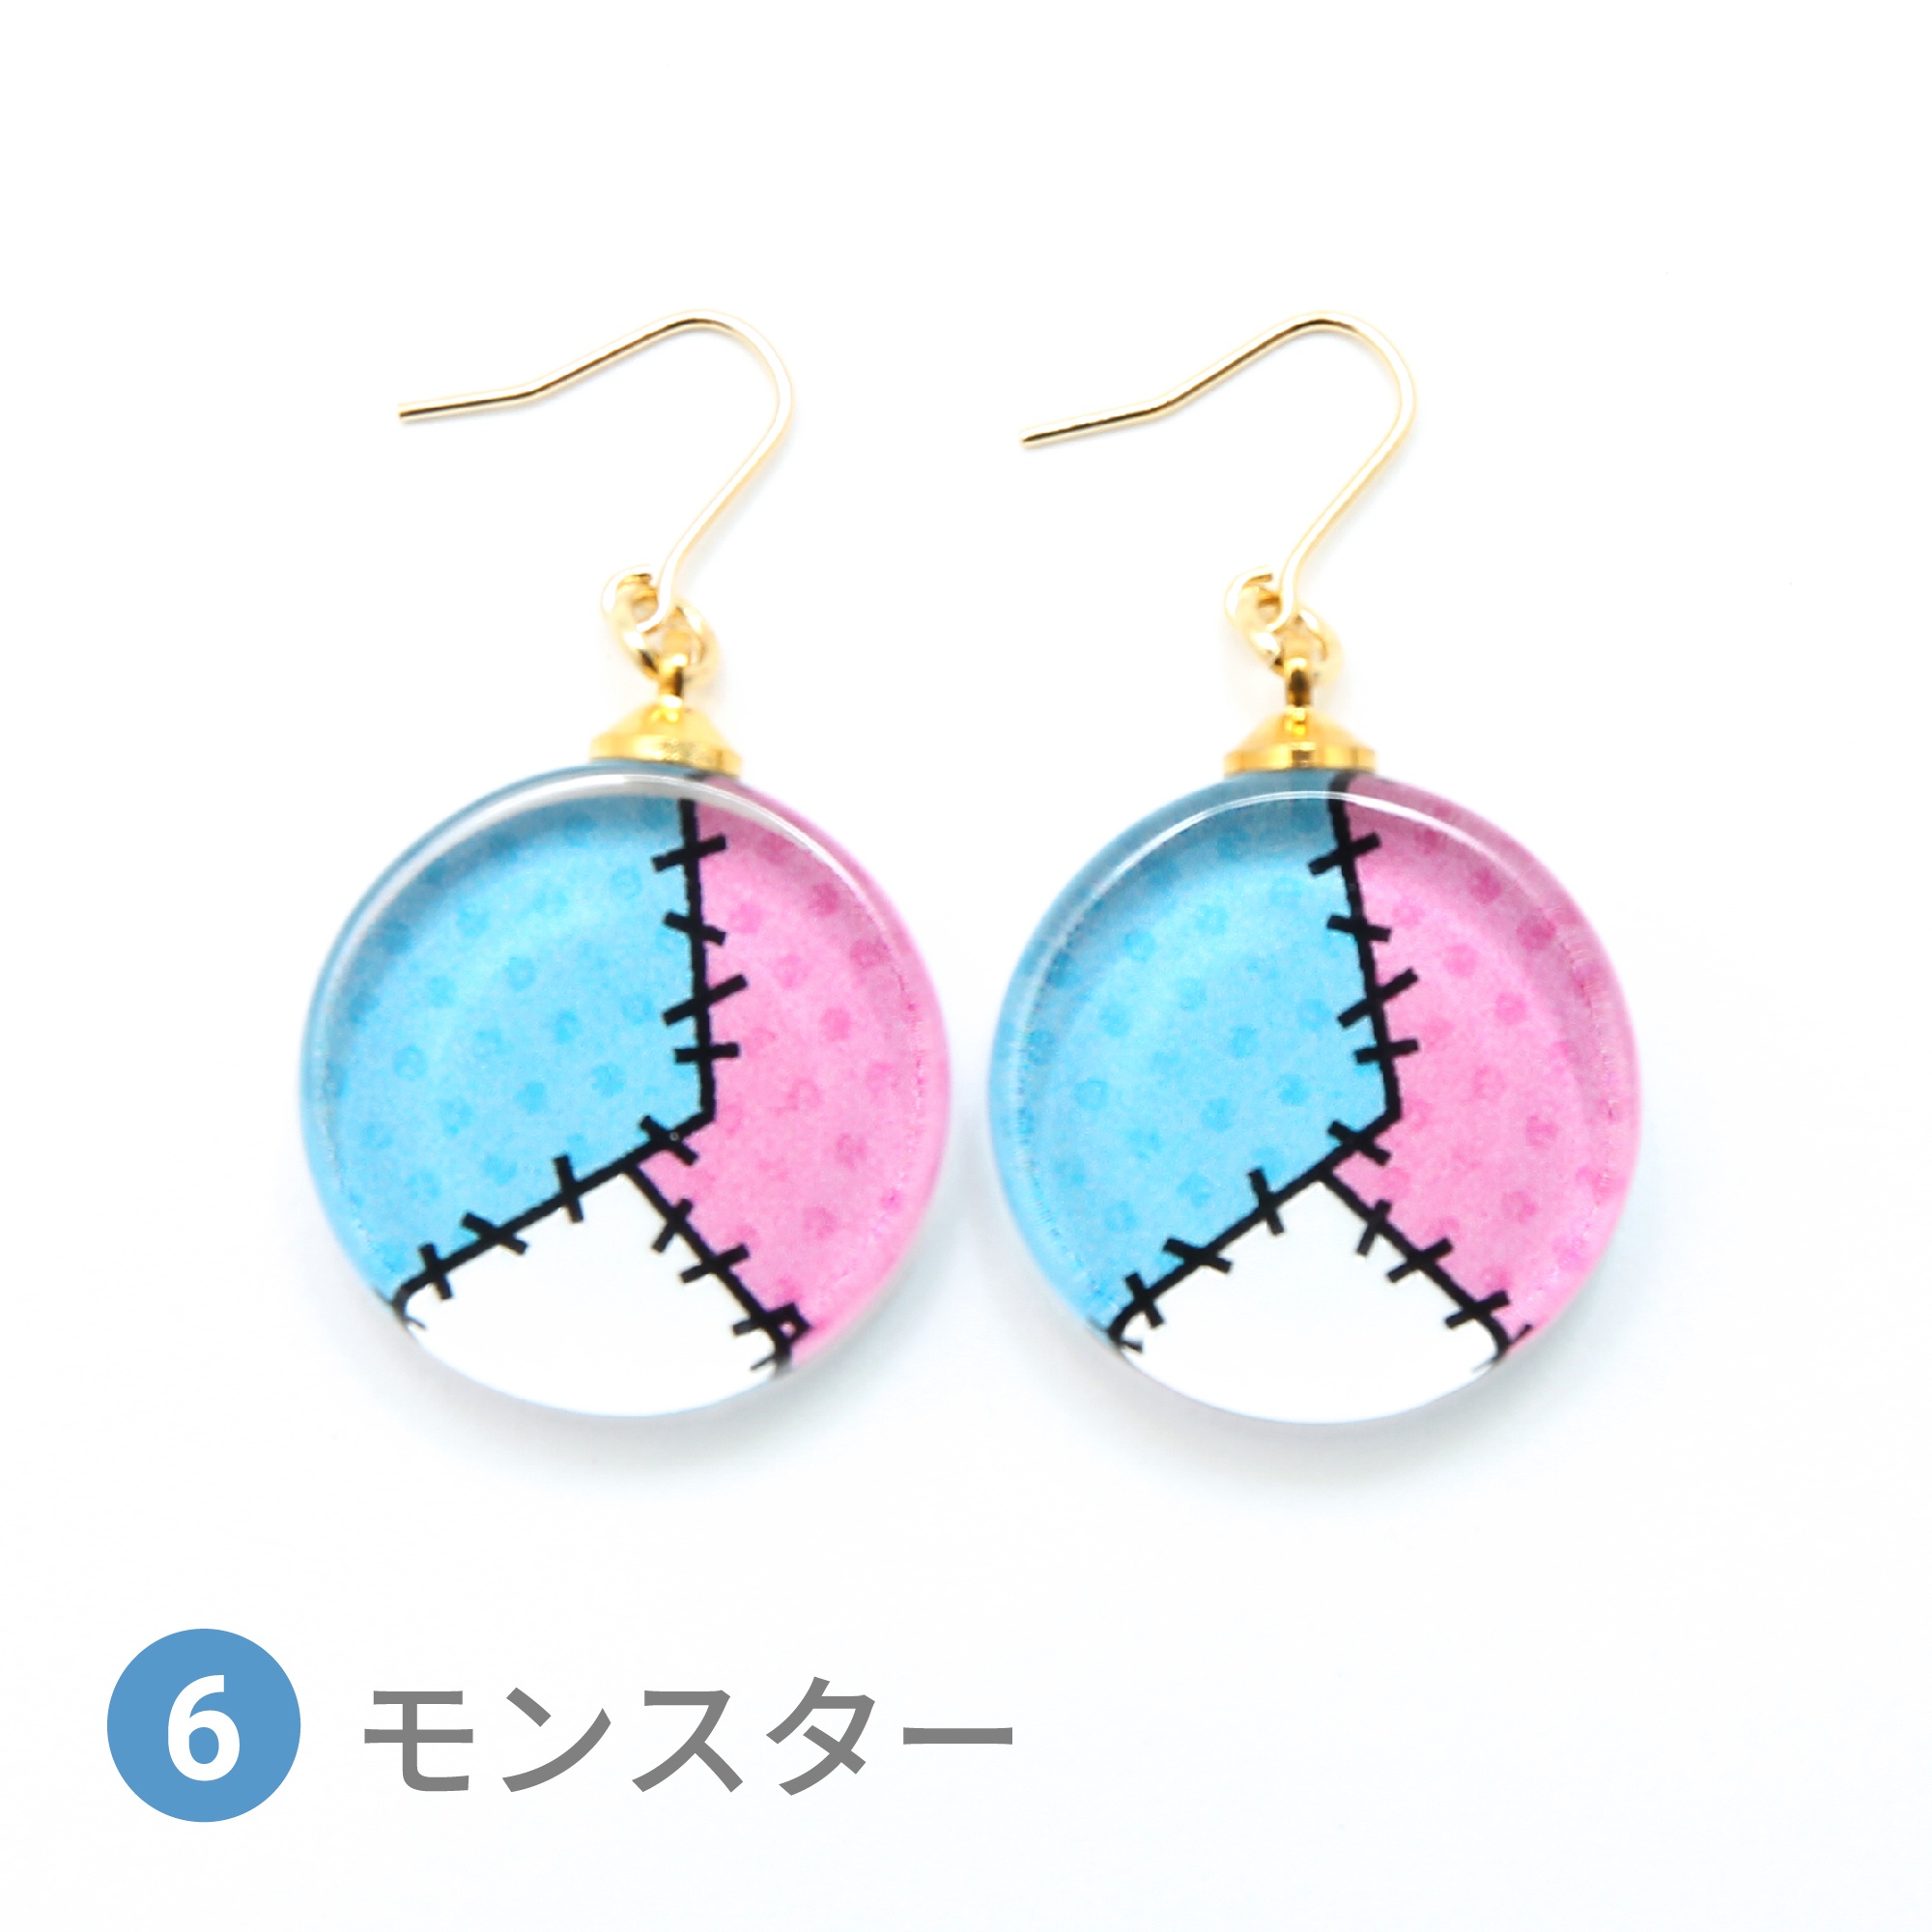 Glass accessories Pierced Earring PATCHWORK monster round shape